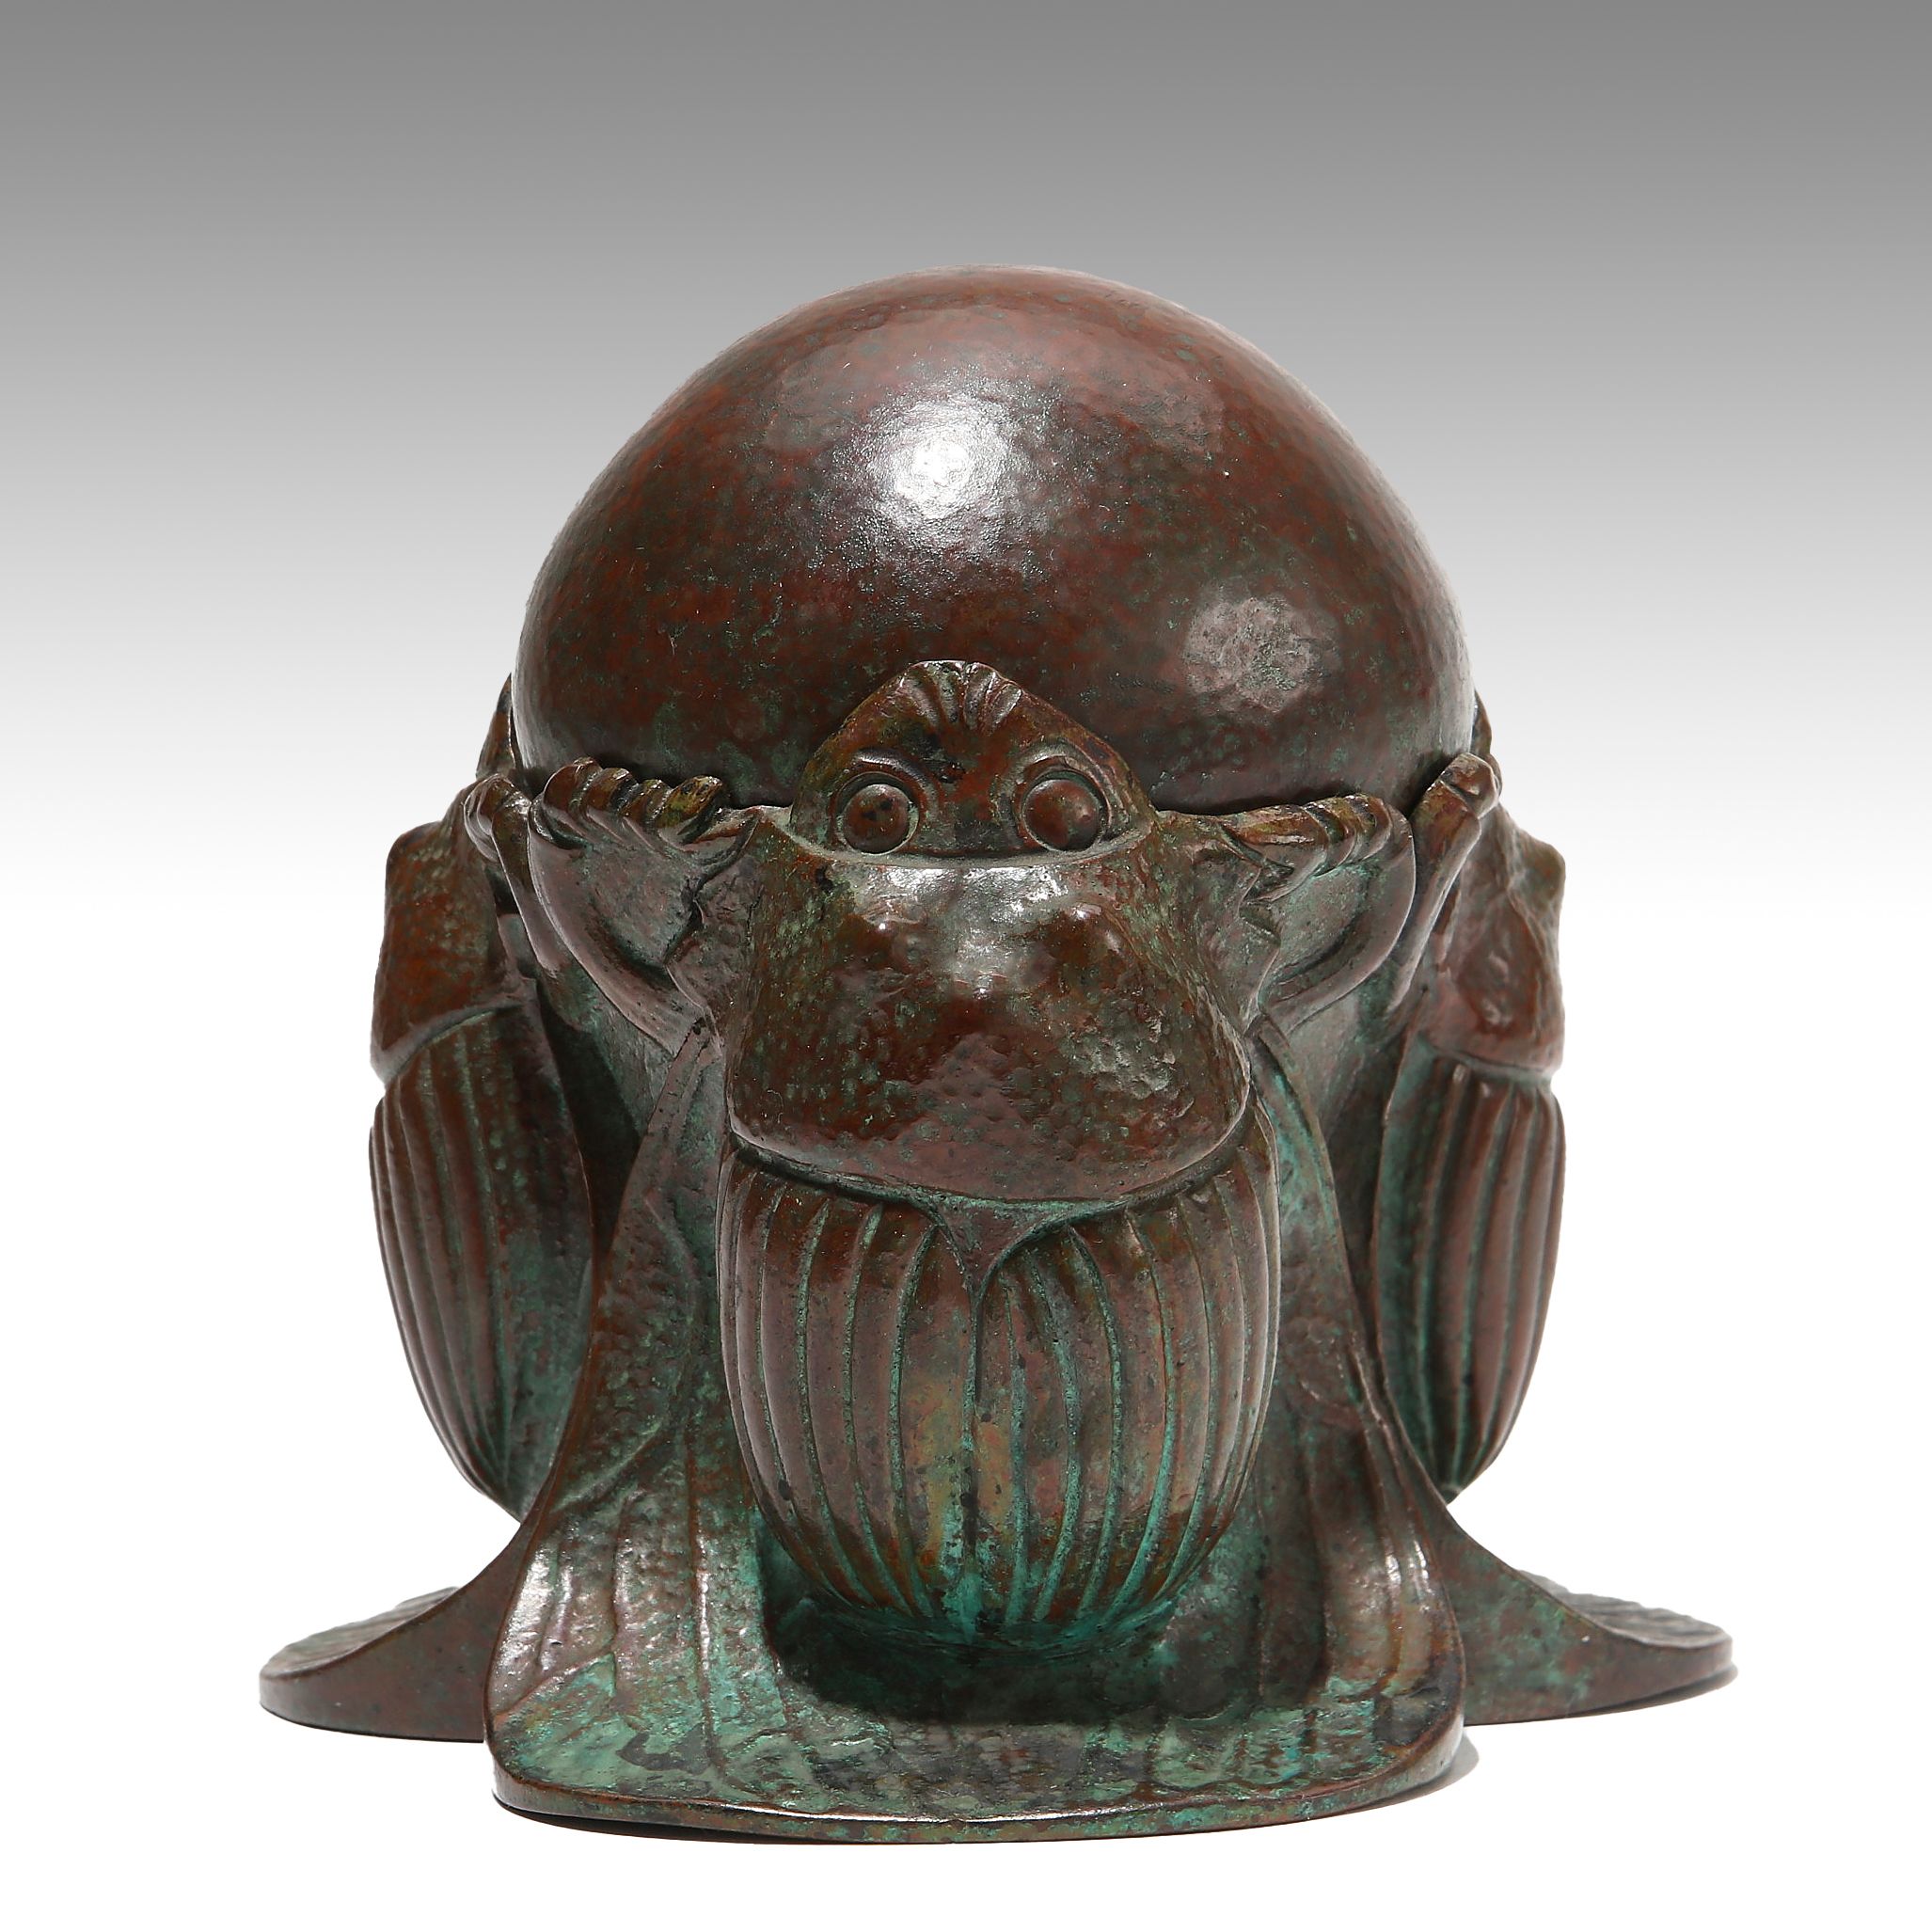 Tiffany Studios patinated bronze three scarab inkwell from the Mitzi Gaynor collection, est. $3,000-$5,000